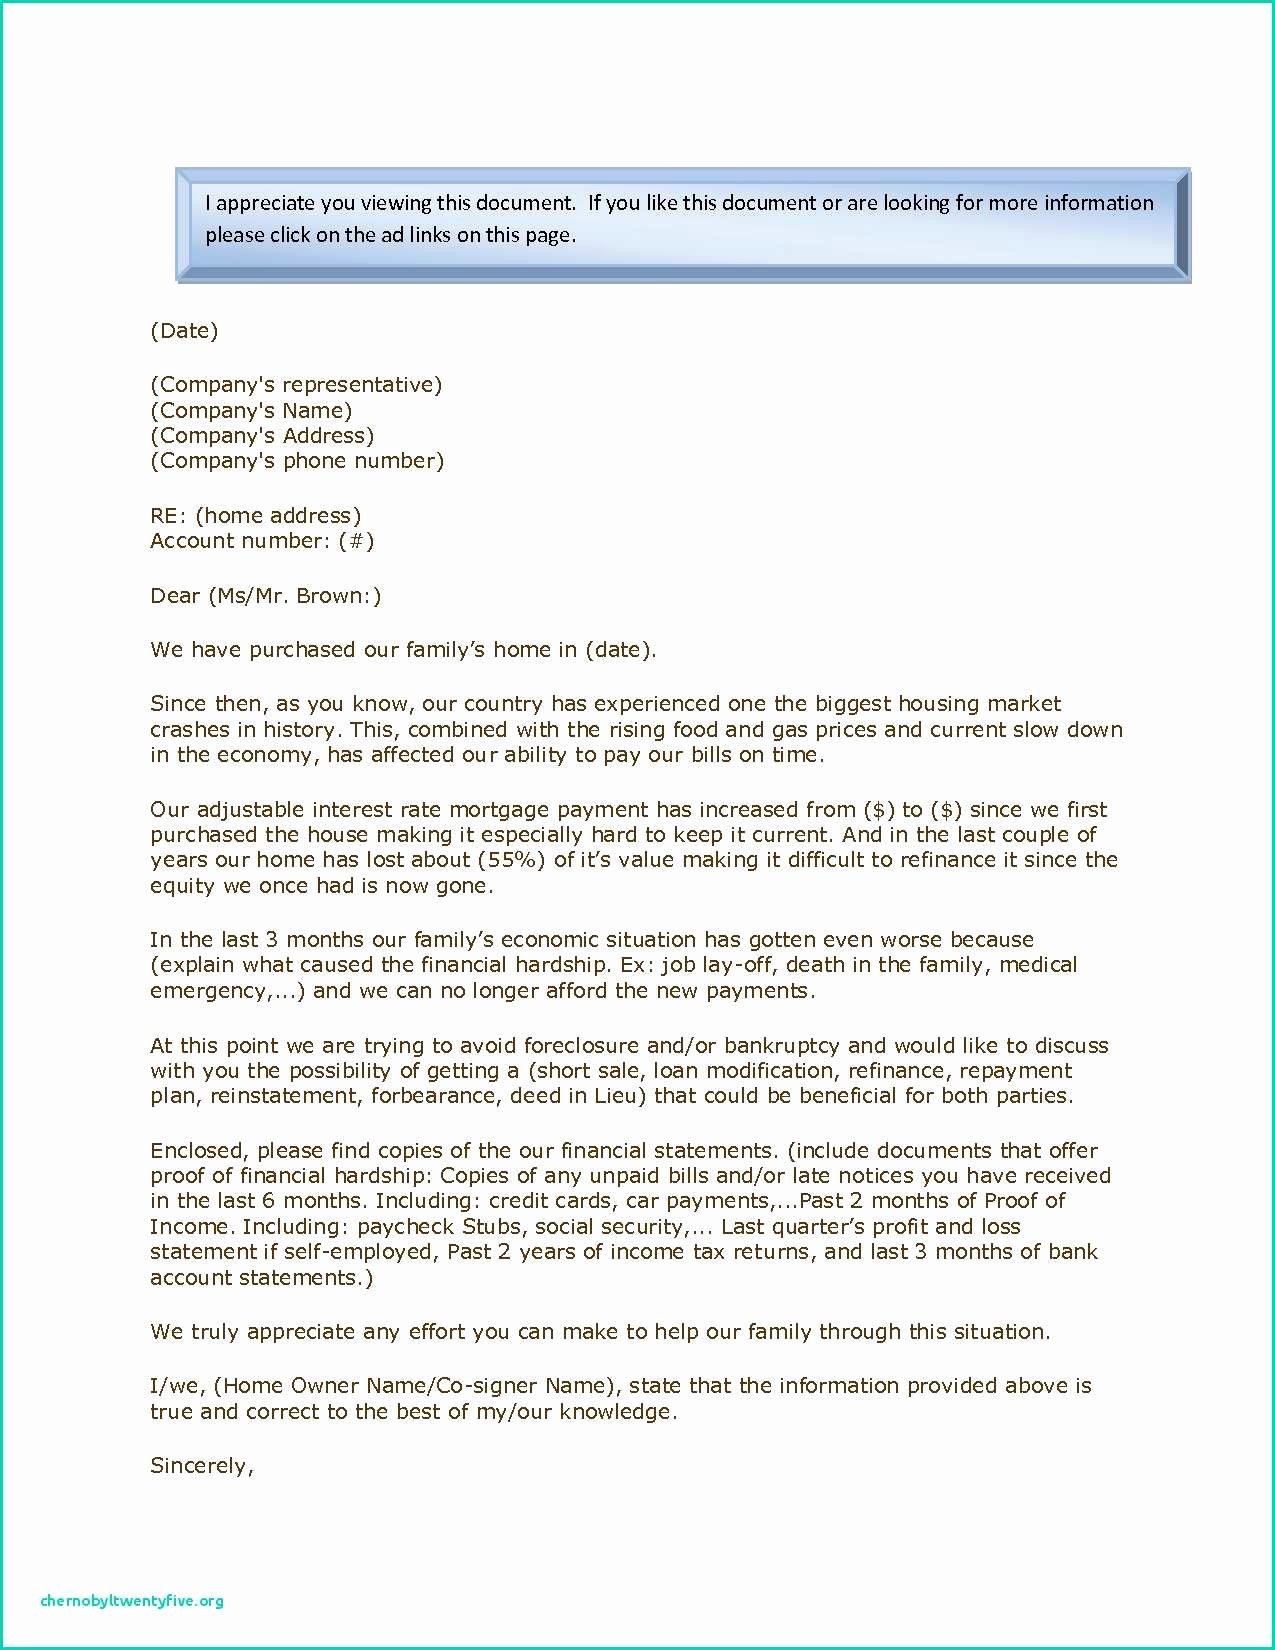 Sample Payment Shock Letter Beautiful Example Hardship Letter for Mortgage Modification